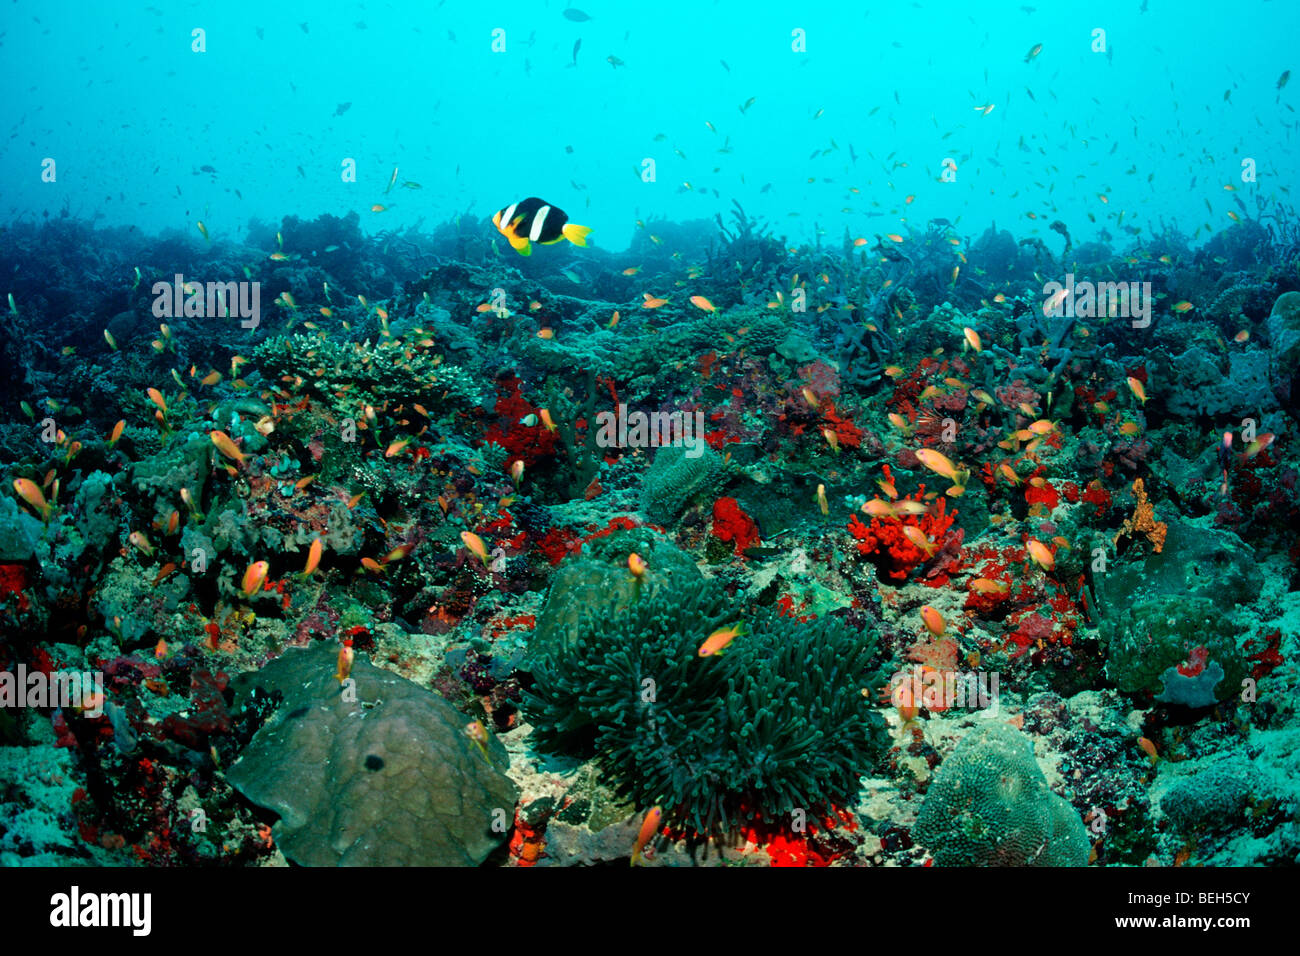 Clarks Anemonefish in Coral Reef, Amphiprion clarkii, South Male Atoll, Maldives Stock Photo